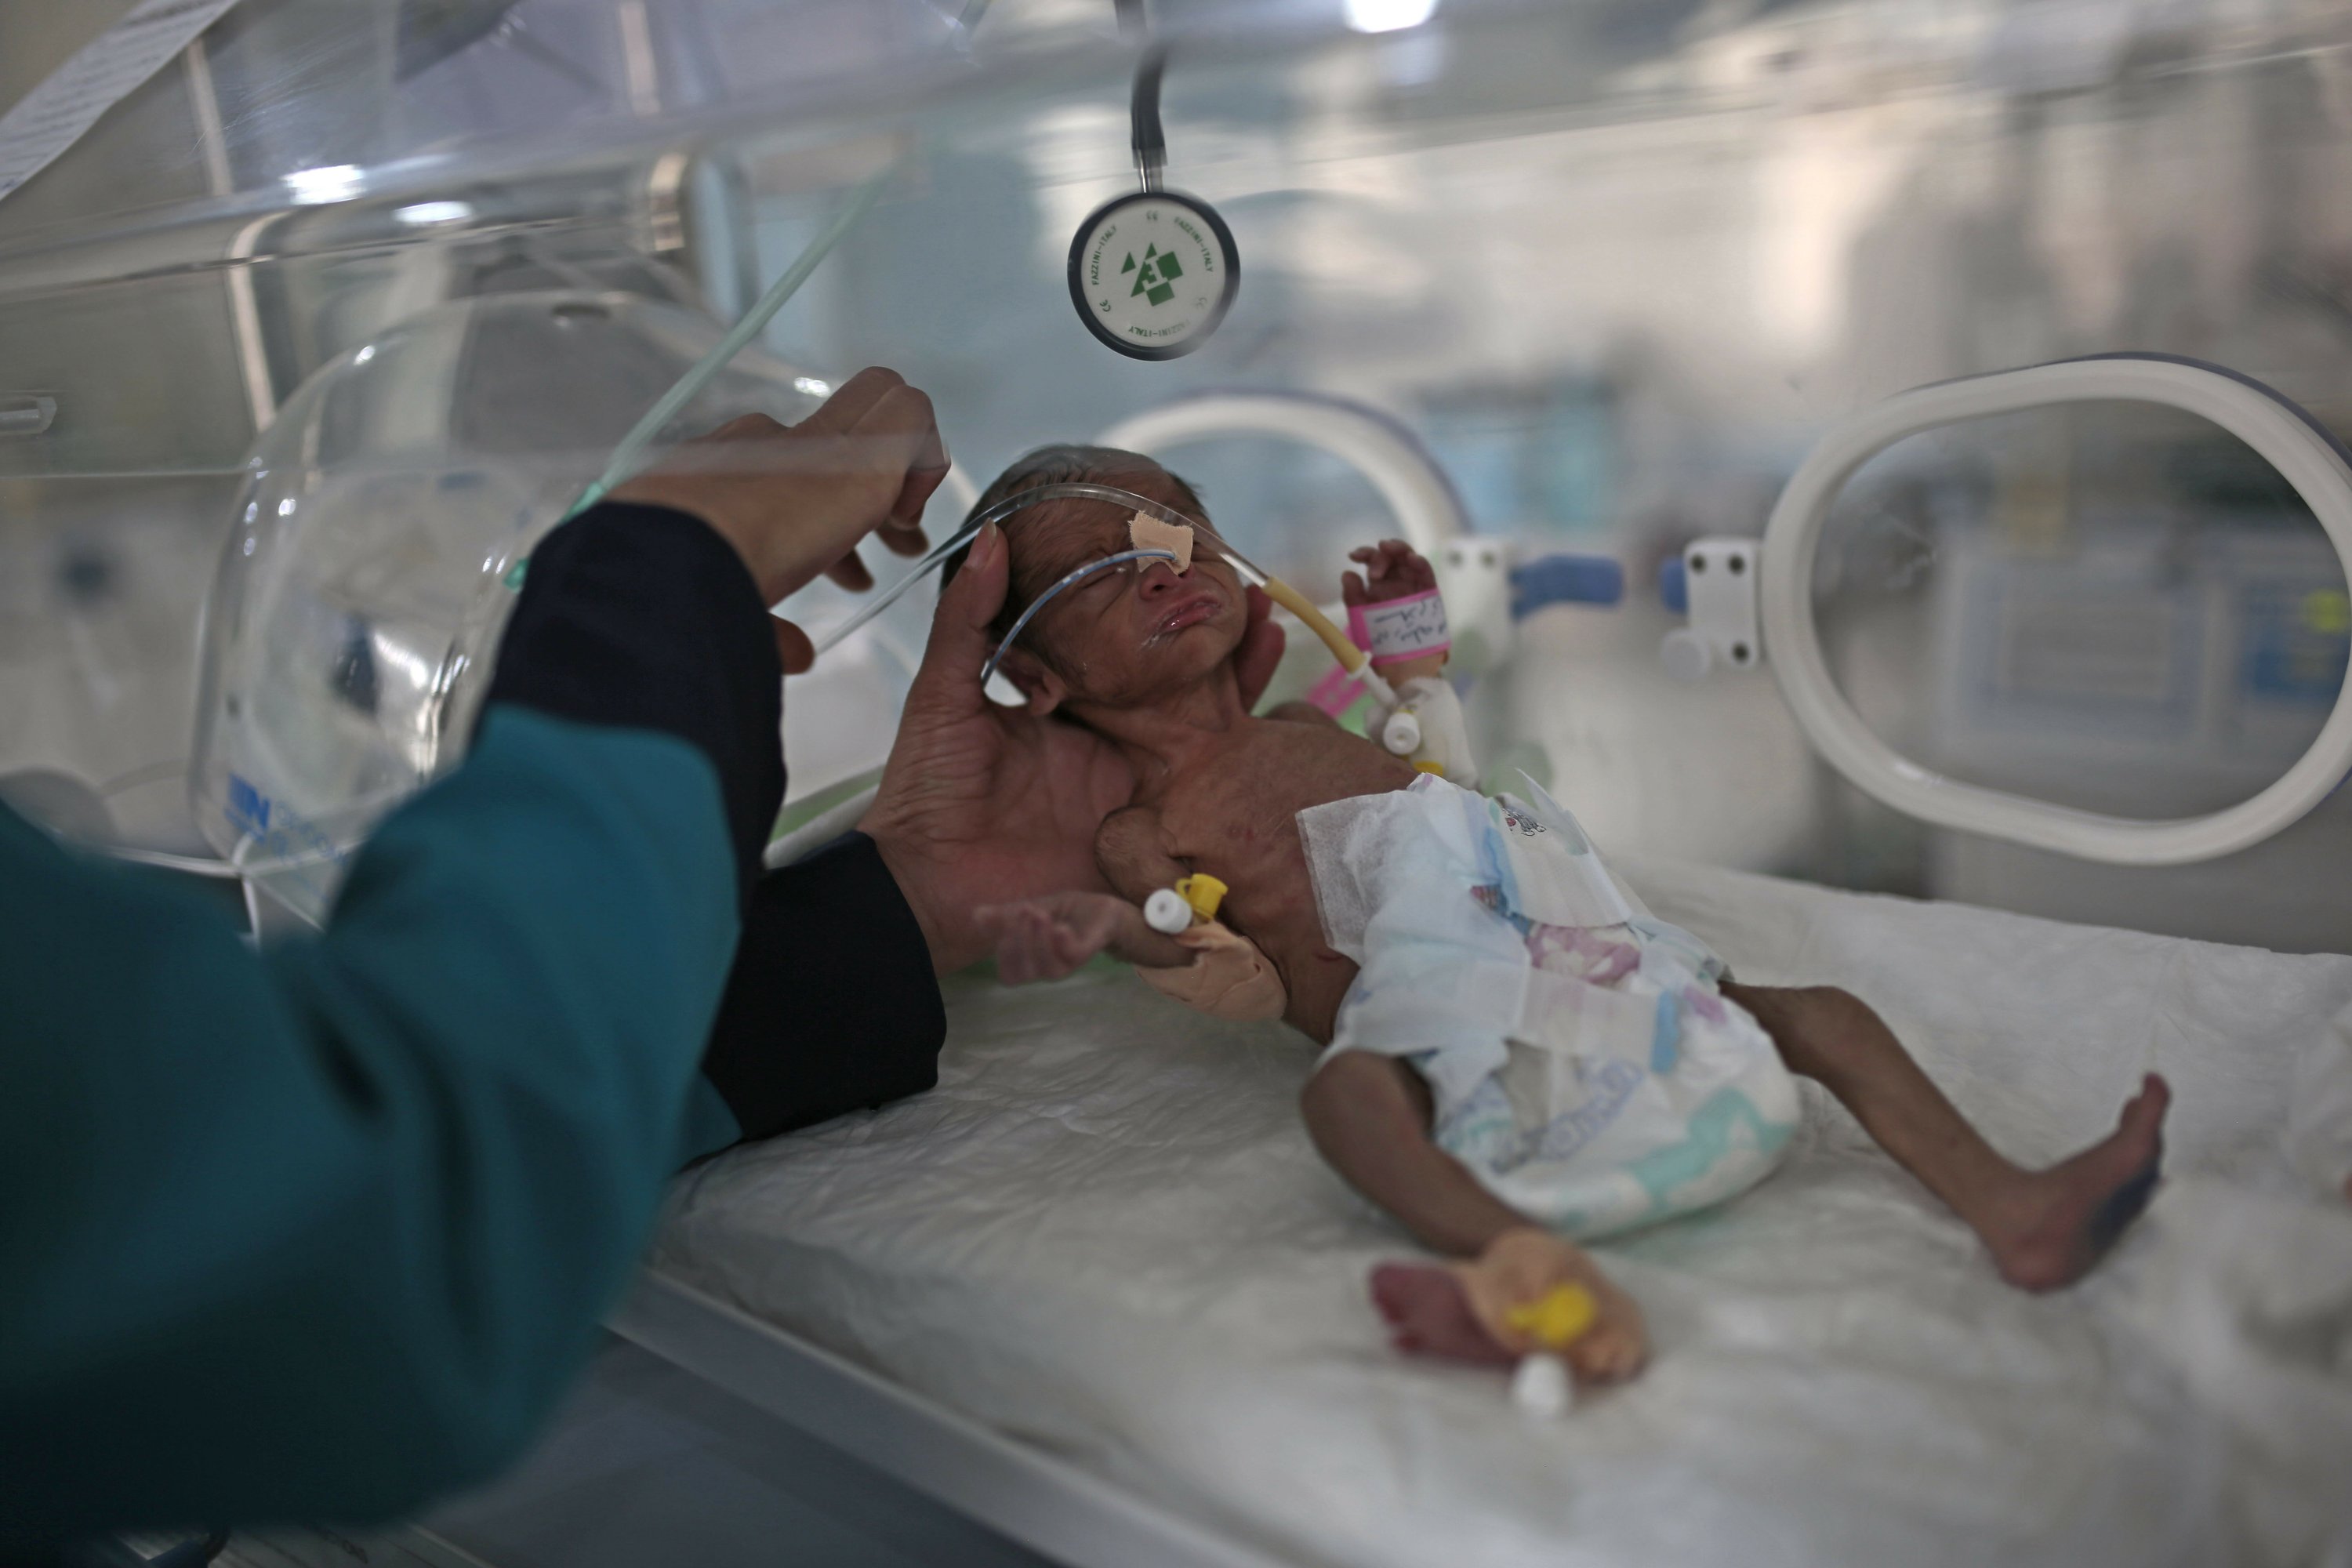 More than 2 million children in Yemen could starve to death in 2021